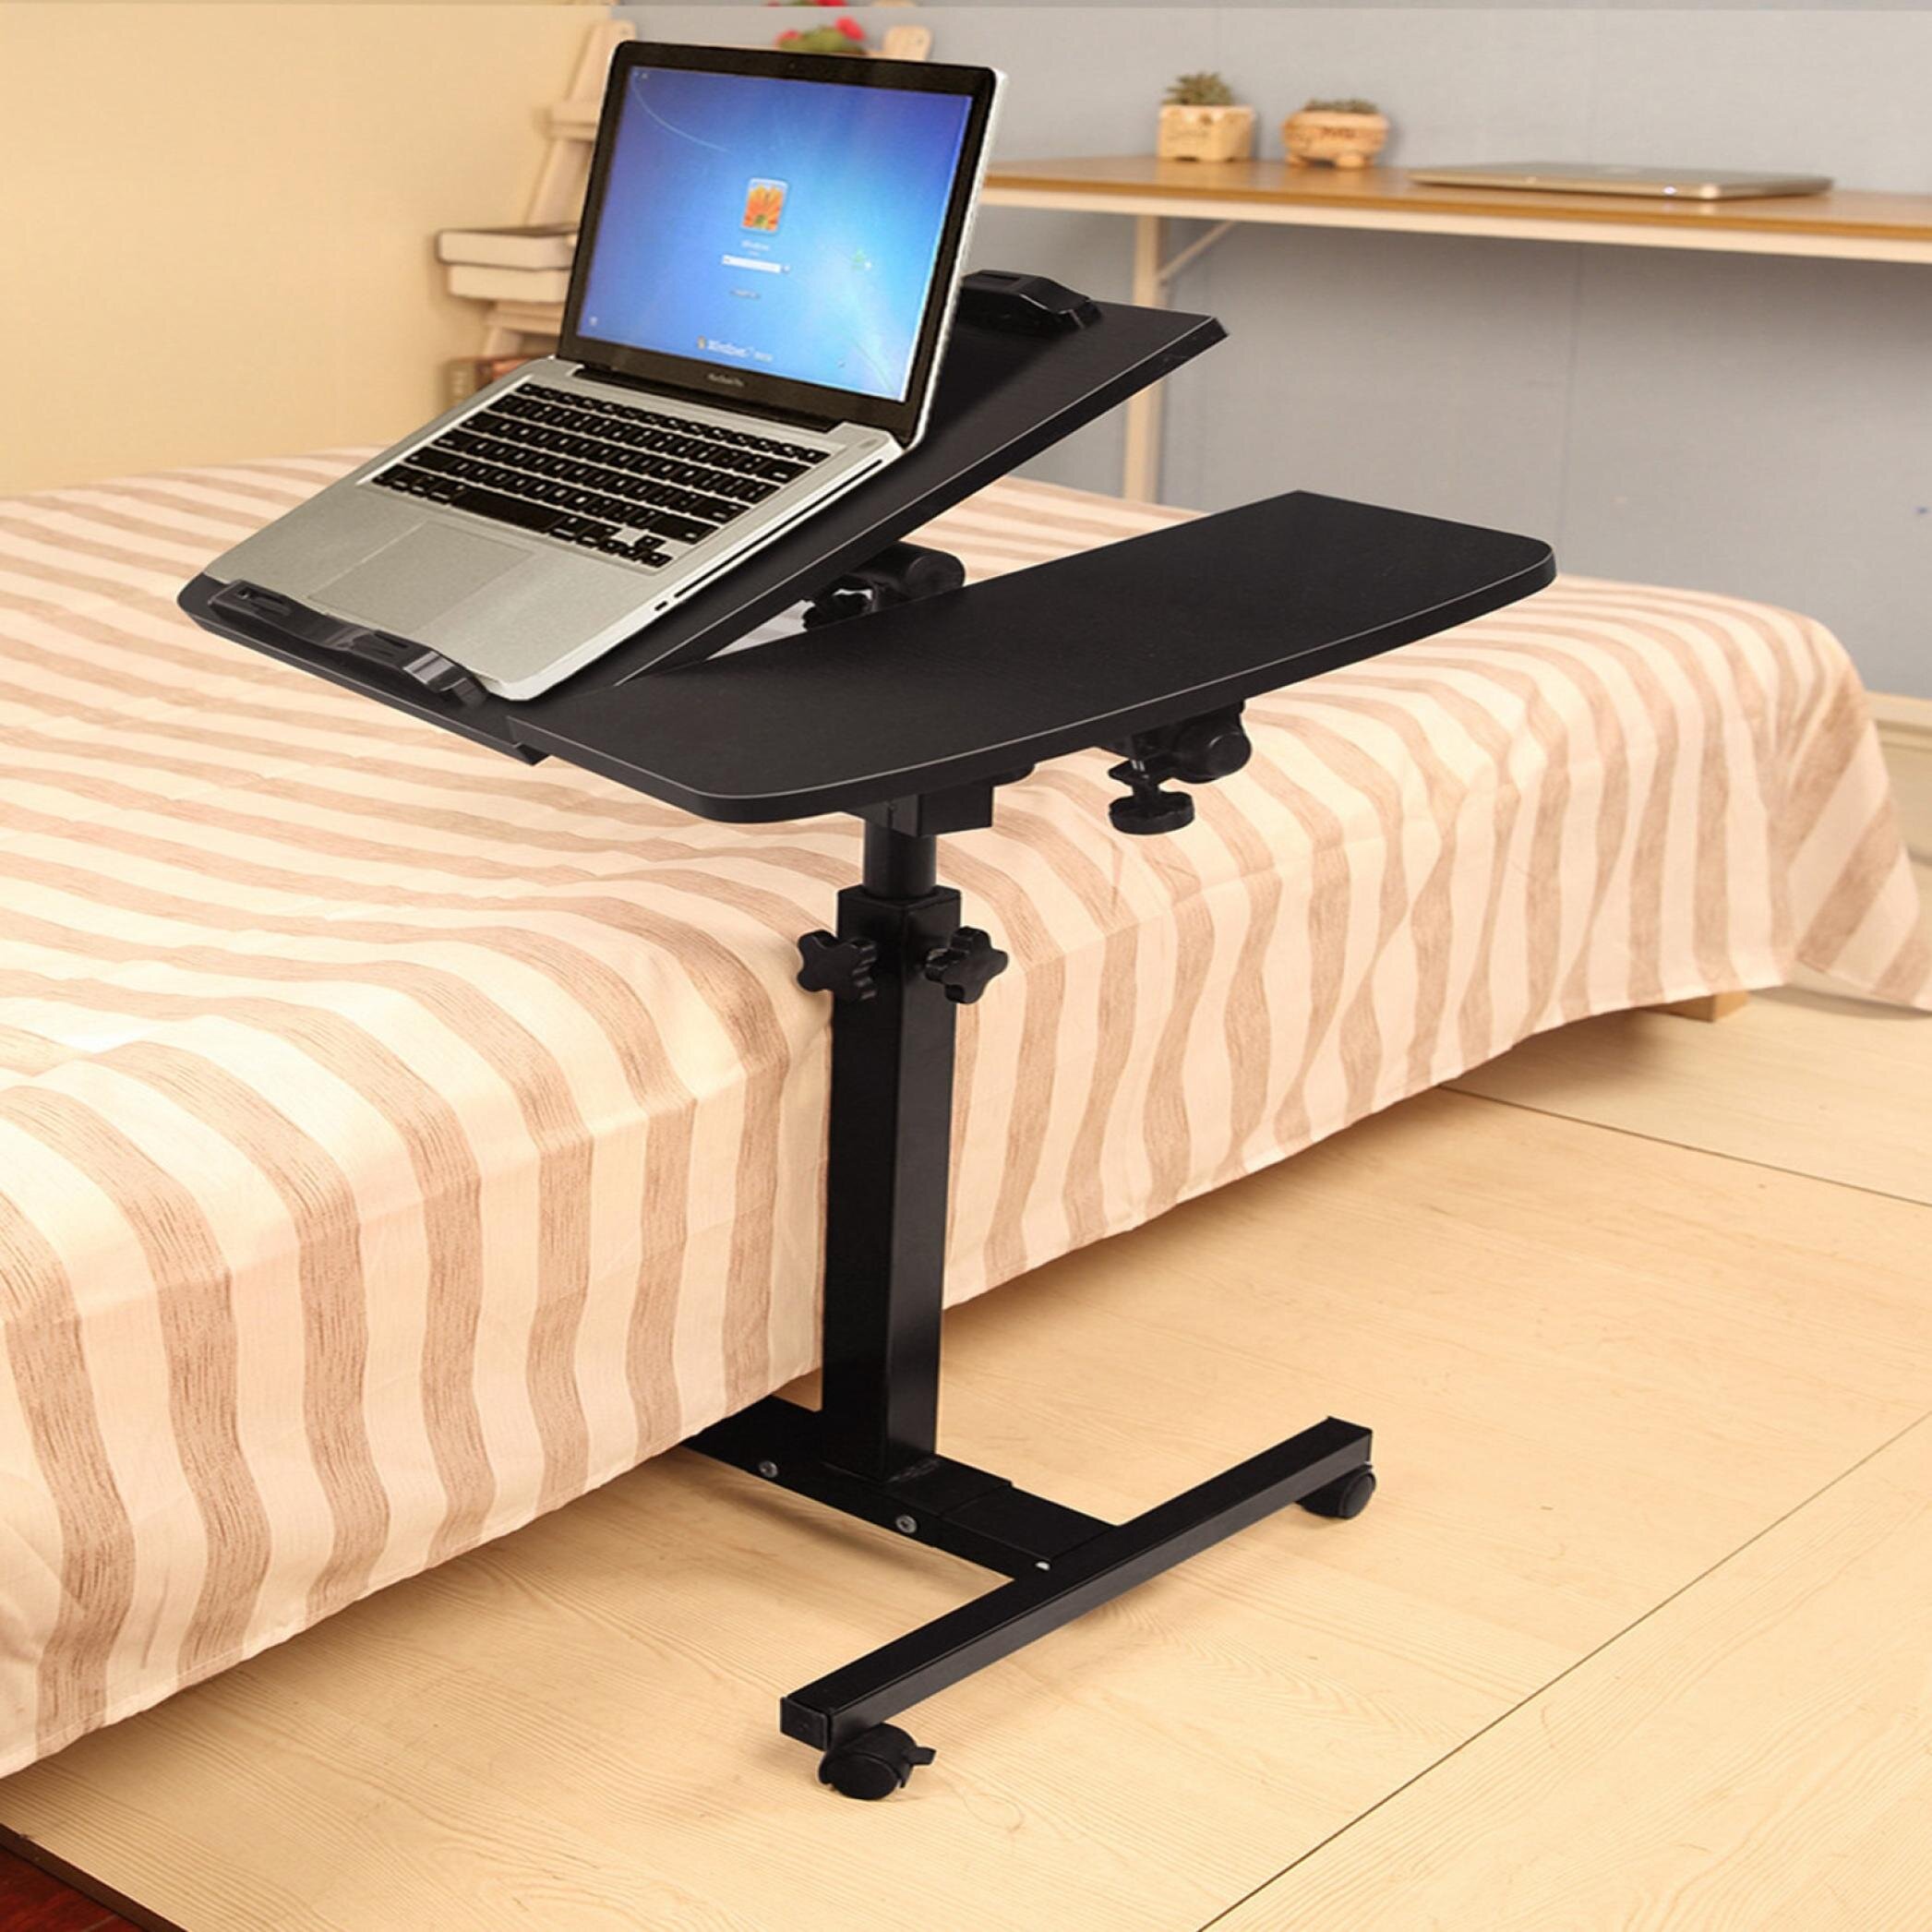 Bed Side Table Rolling Wheels Adjustable Movable Portable Laptop Computer Stand